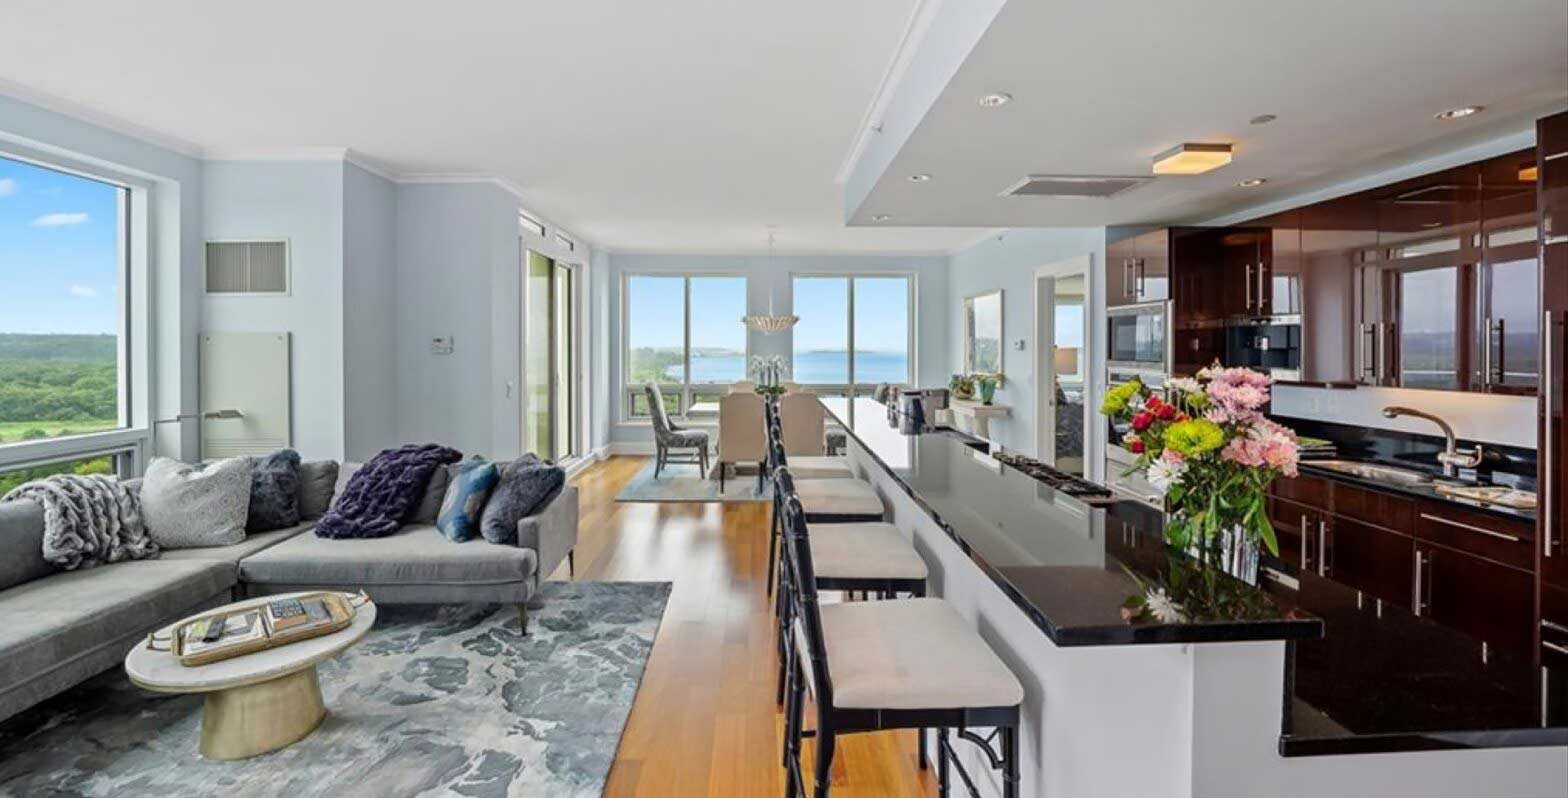 Featured image for post: One Tower Drive, Unit 1402, Portsmouth, RI (SOLD, $857,000)